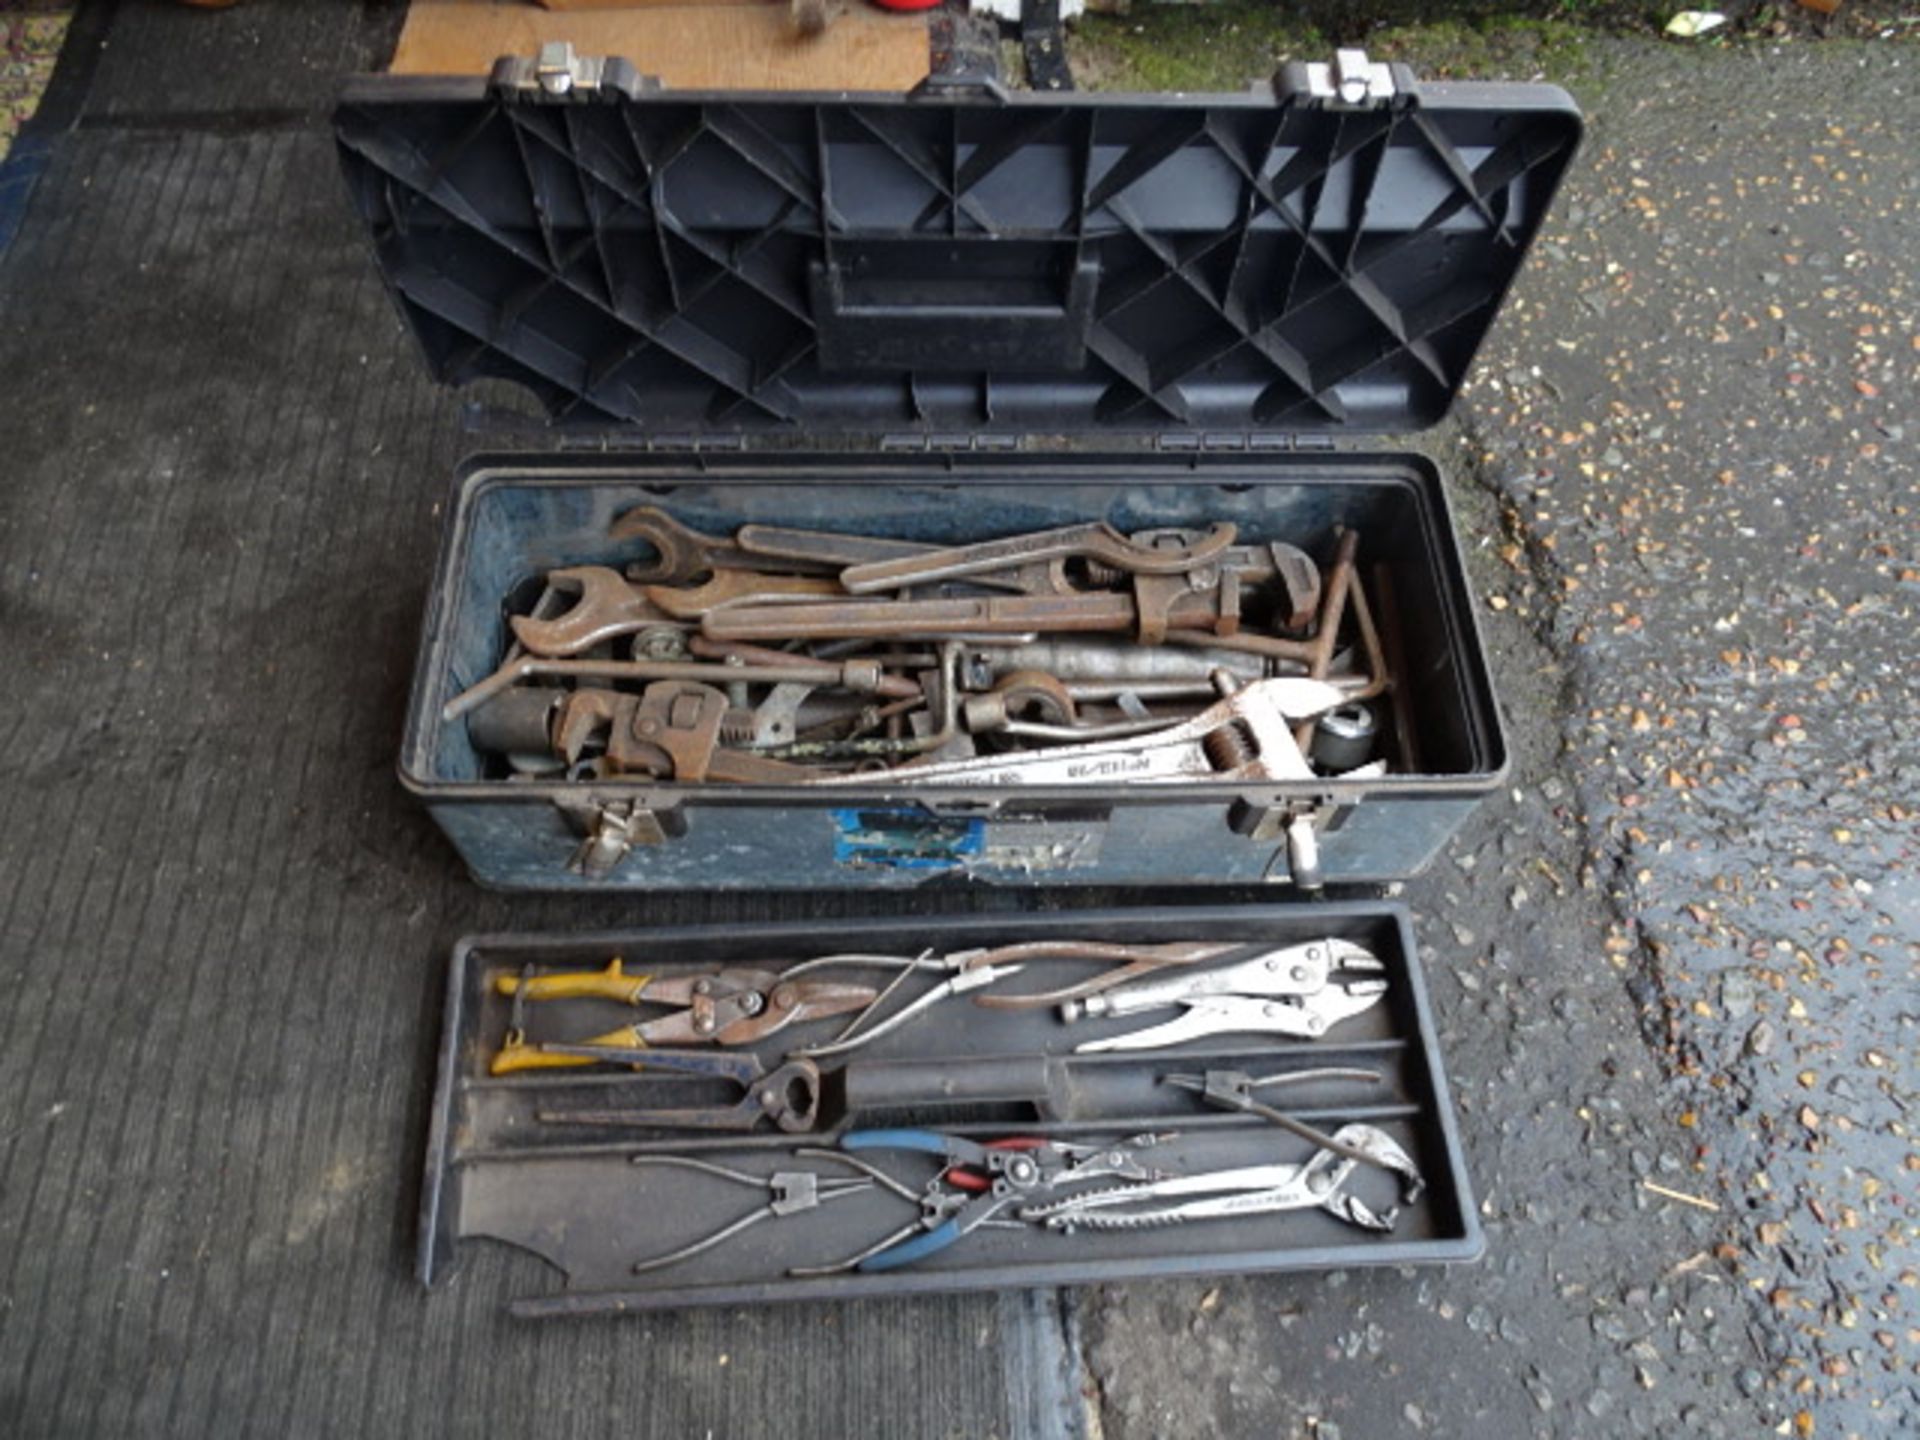 Toolbox full of tools to include spanners, adjustable wrenches and pliers etc